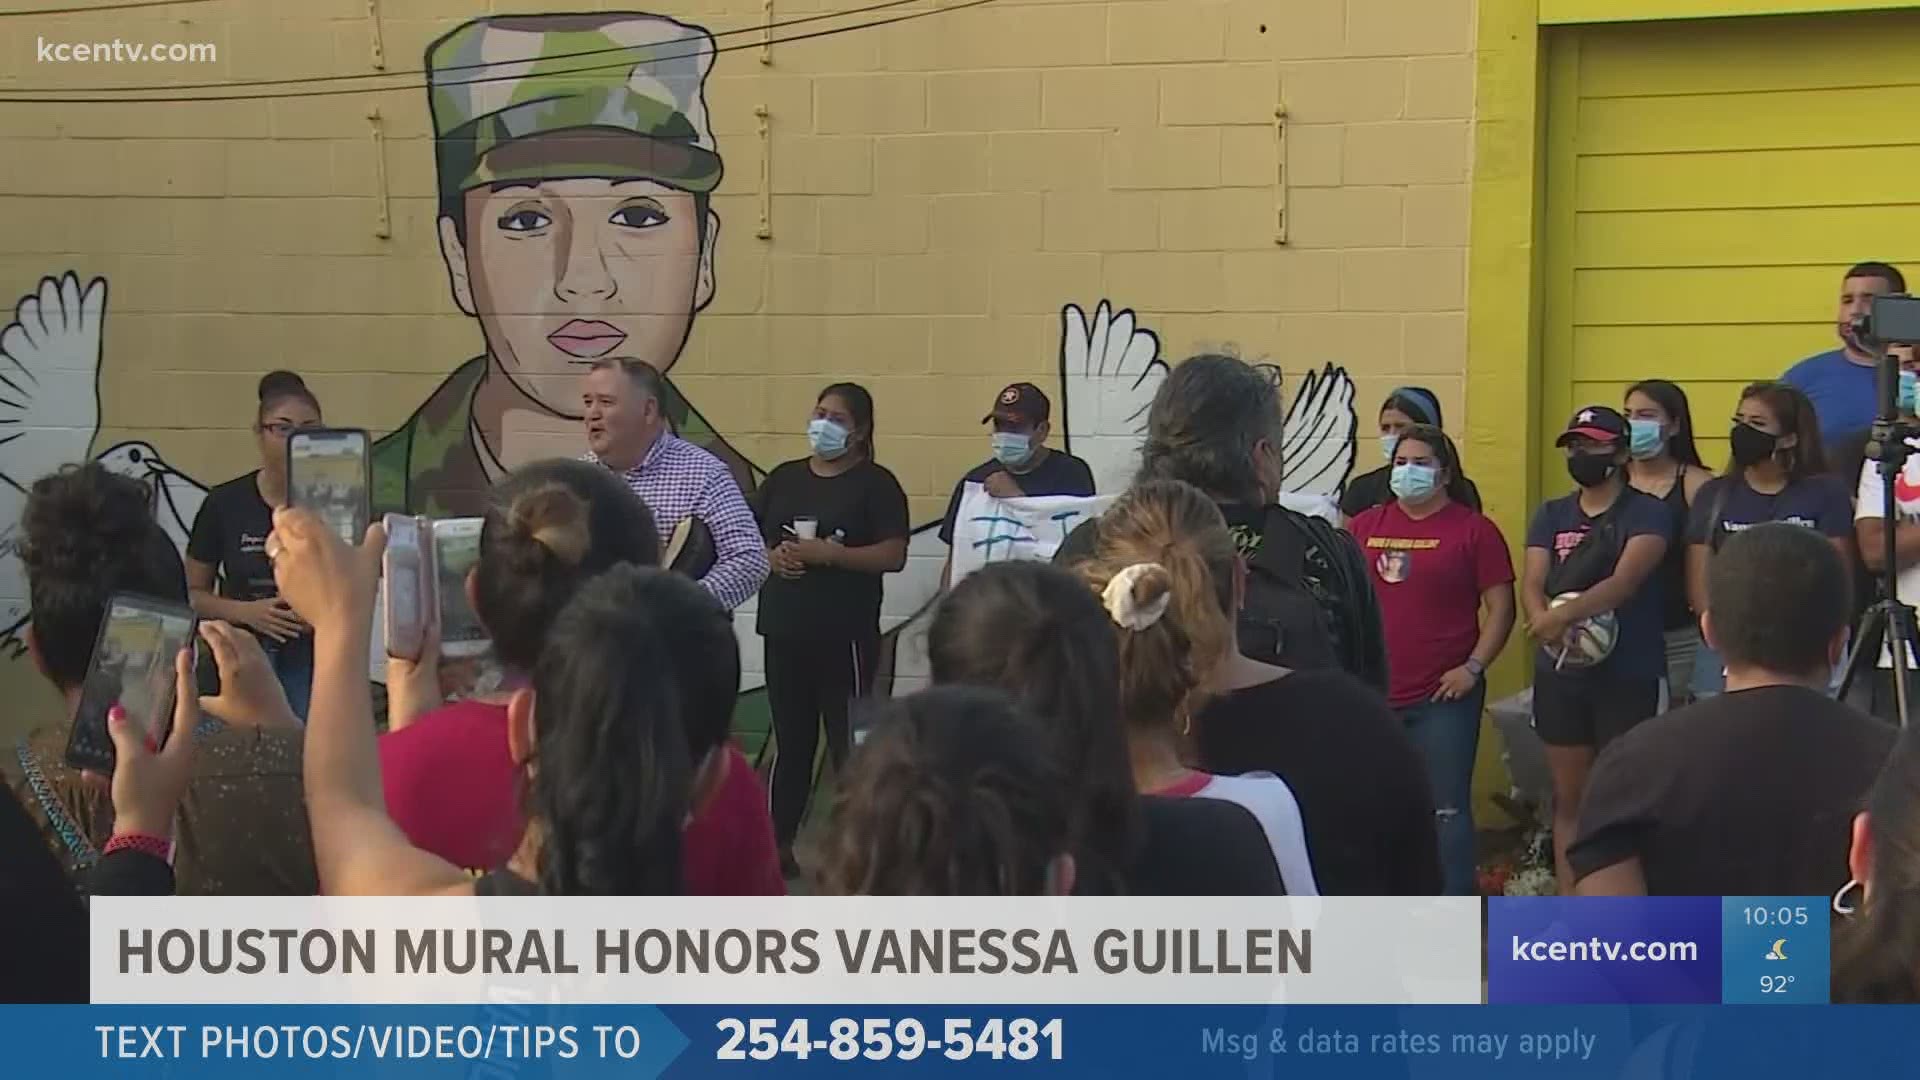 The muralist in Houston who painted the piece also previously created a mural to honor George Floyd.